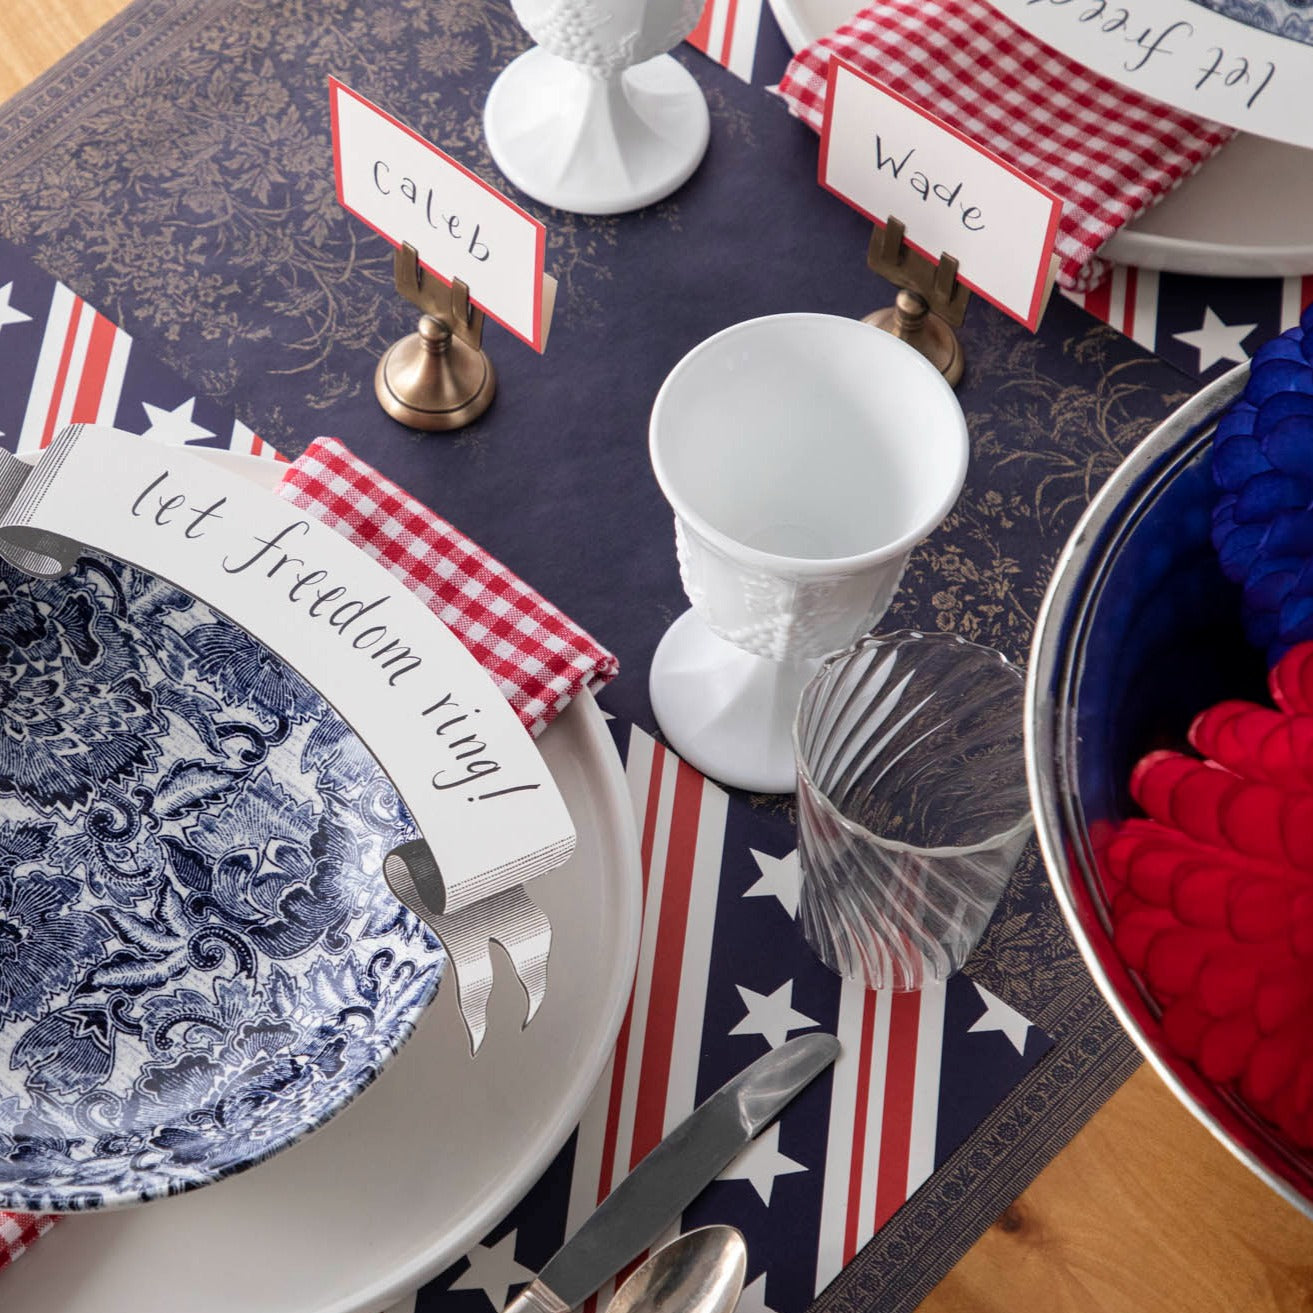 The Stars and Stripes Placemat under a patriotic table setting for two, from above.